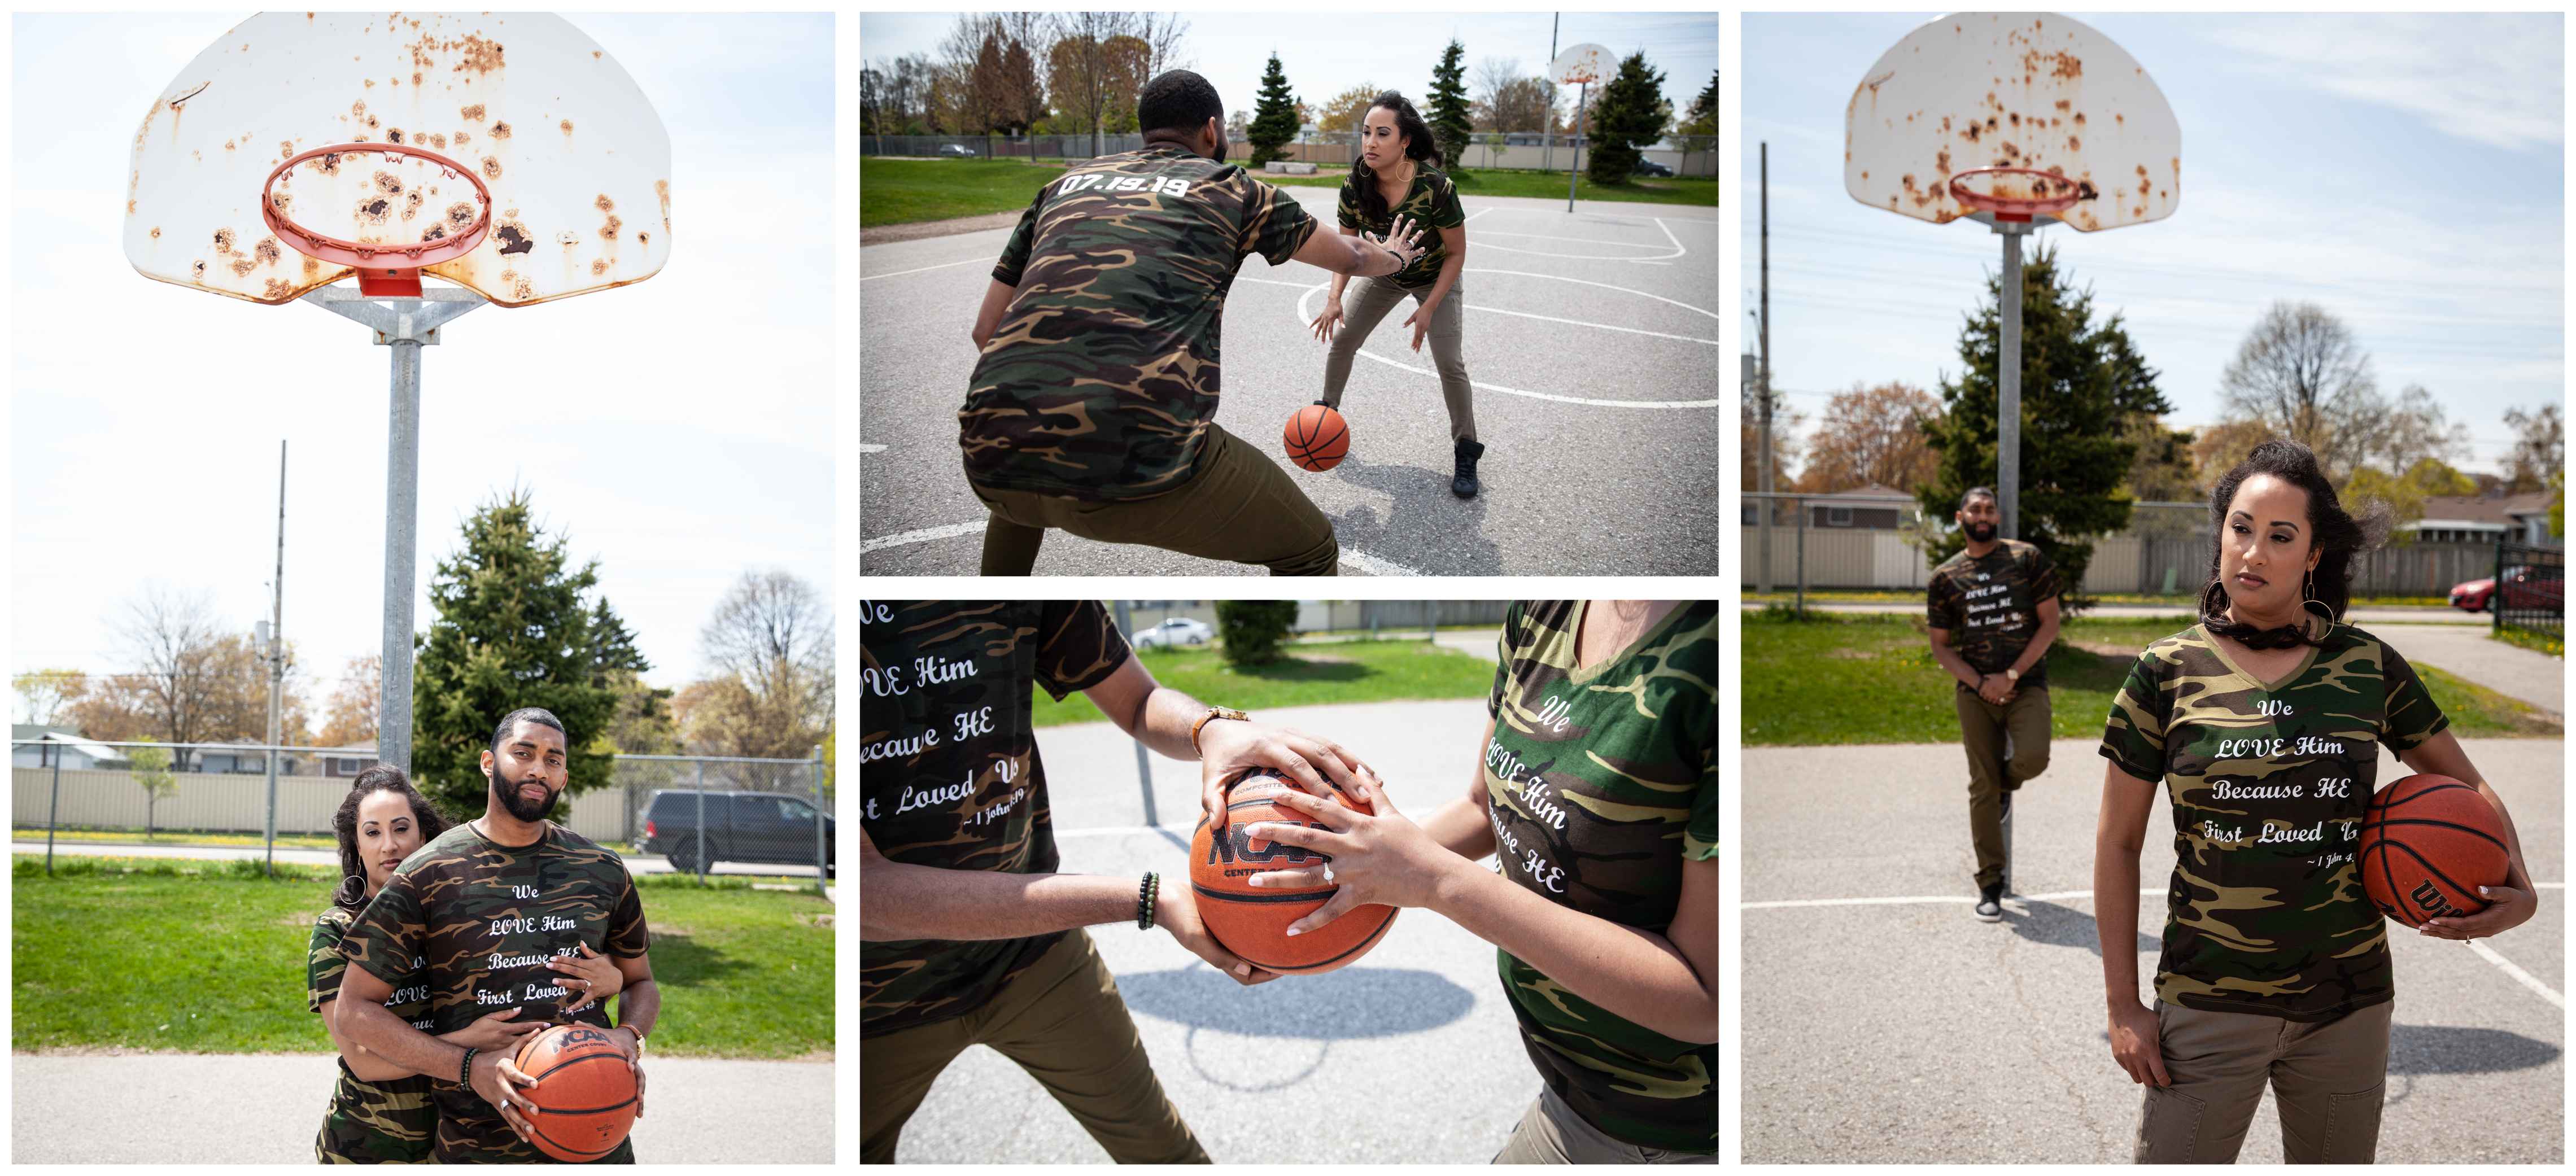 Basketball game during an engagement photoshoot in Ajax